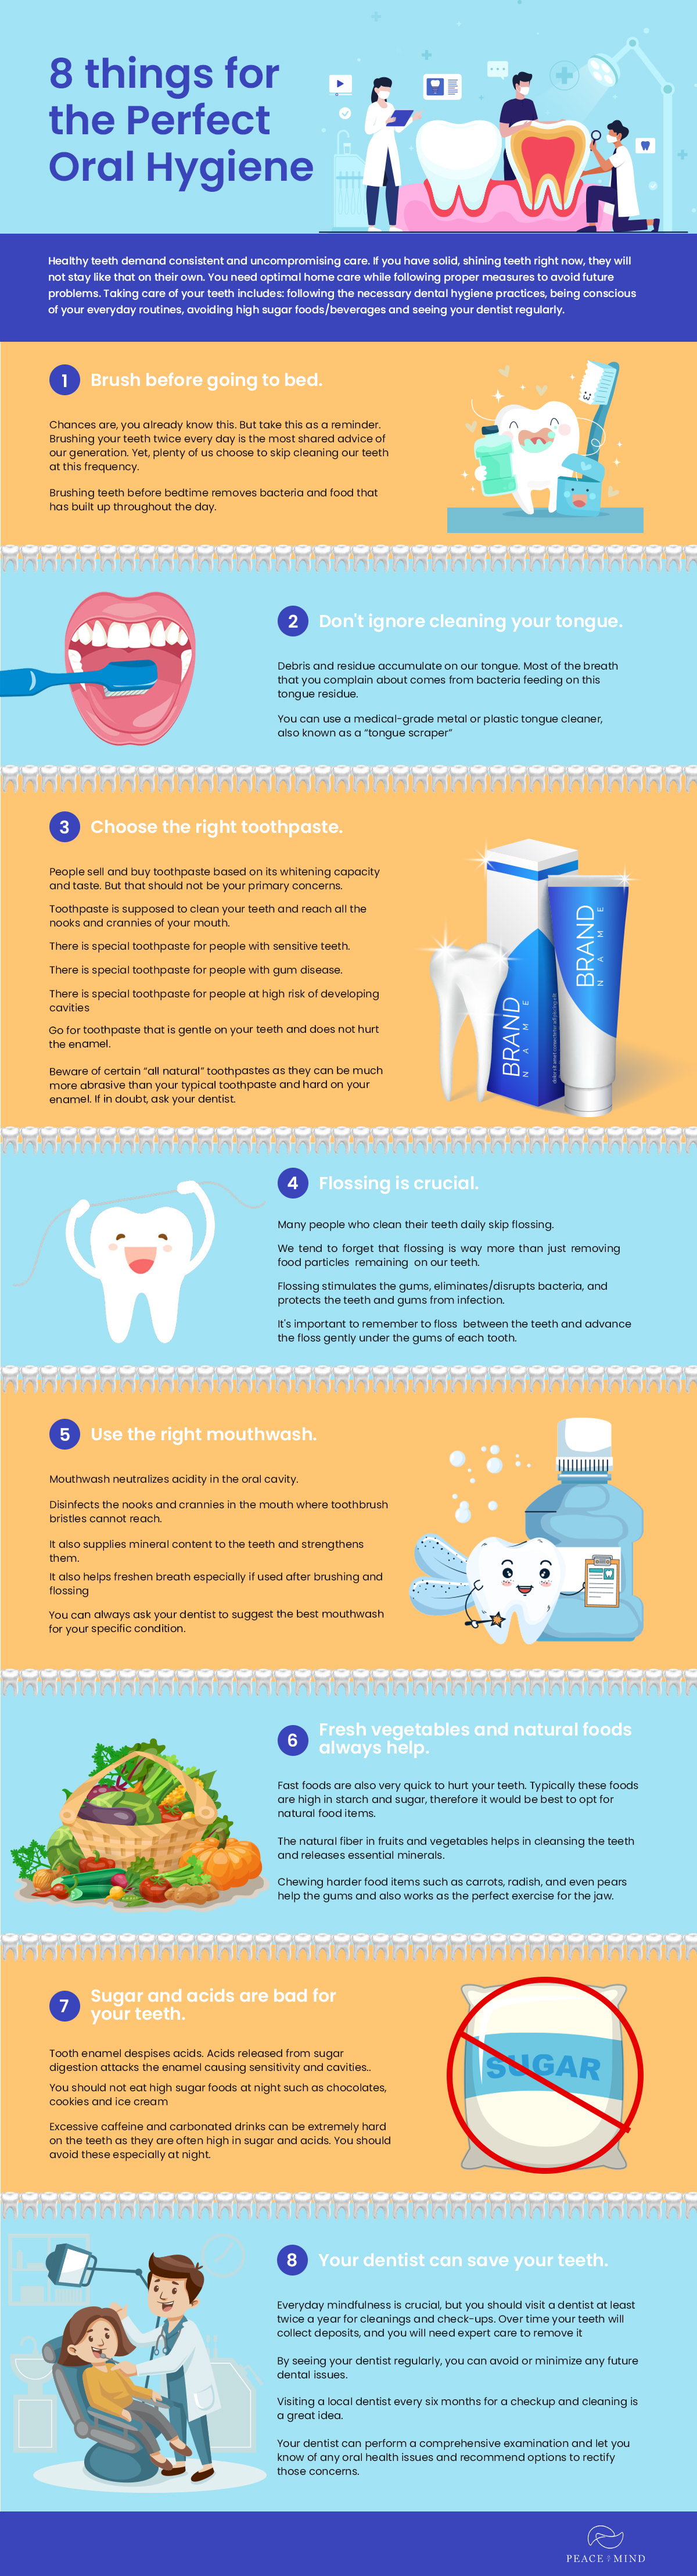 3-questions-to-ask-Oral Hygiene Basics: What Drinks You Should Avoid